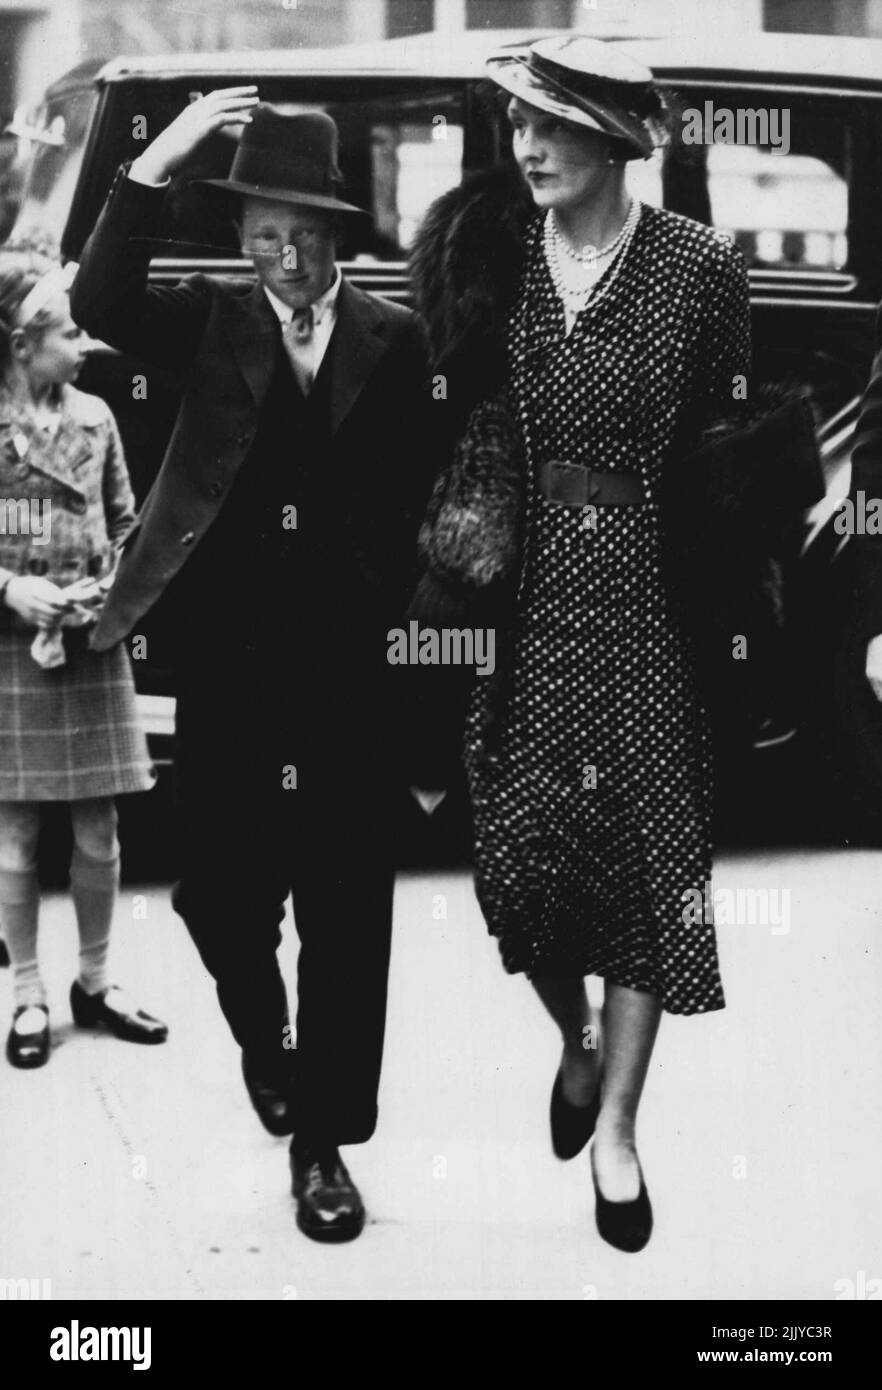 Photo Shows:- The young Earl of Dalkeith arriving with the Duchess of Buccleuch (his mother) arriving at Westminster Abbey for the Coronation rehearsal (May 6th 1937). Royal Engagement Report the Earl of Dalkeith:- In a report from London, the Paris newspaper 'France Soir' says that Princess Margaret's engagement to the Earl of Dalkeith will be announced in August. The Earl who is heir to the Duke of Buccleuch, is 26. He served in the Royal Navy throughout the recent war. June 01, 1950. (Photo by Fox Photos). Stock Photo